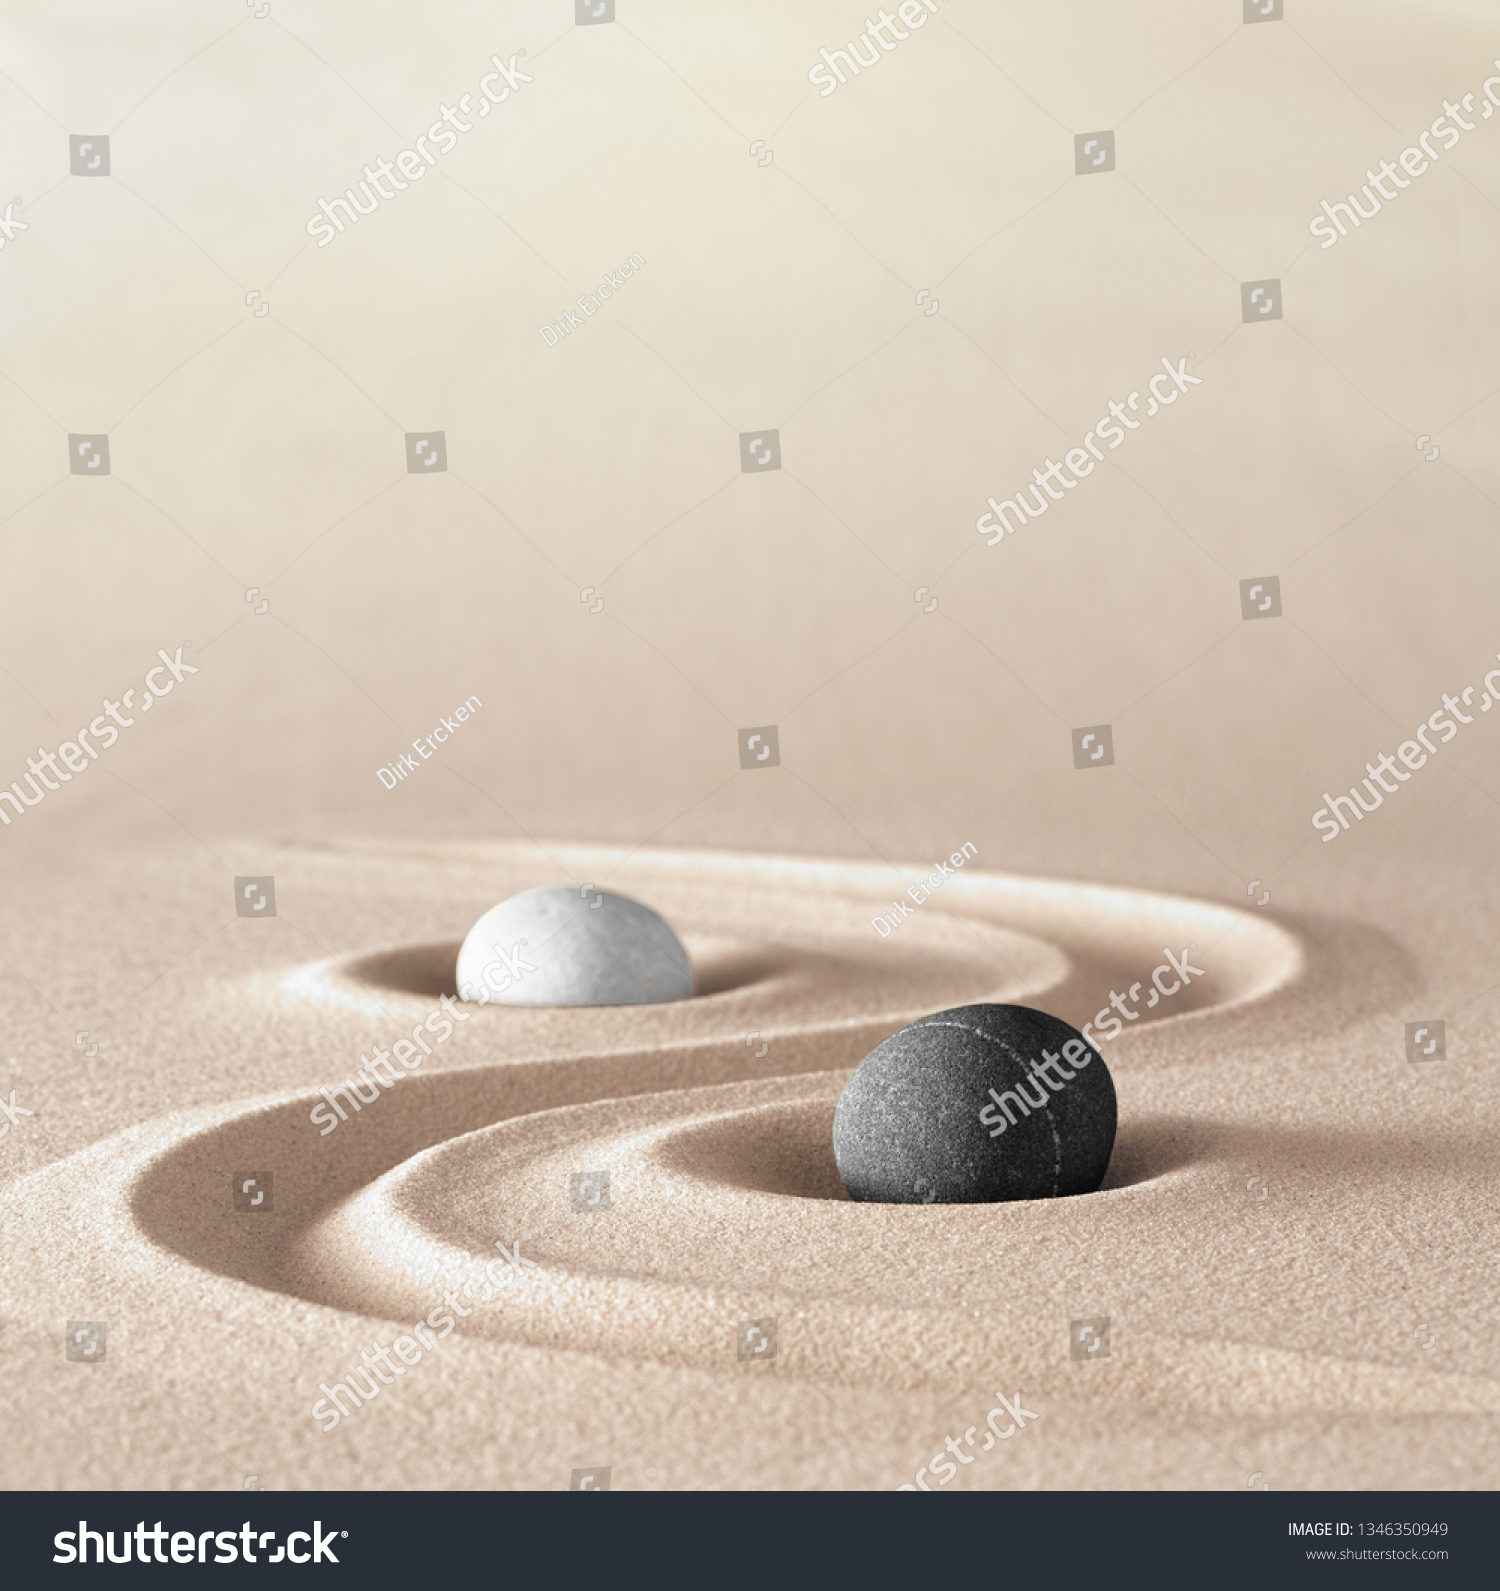 yin and Yang symbol of dualism in ancient Chinese philosophy where opposite or contrary forces are complementary. Like light and dark or fire and water, male and female. A black an white round stone #1346350949